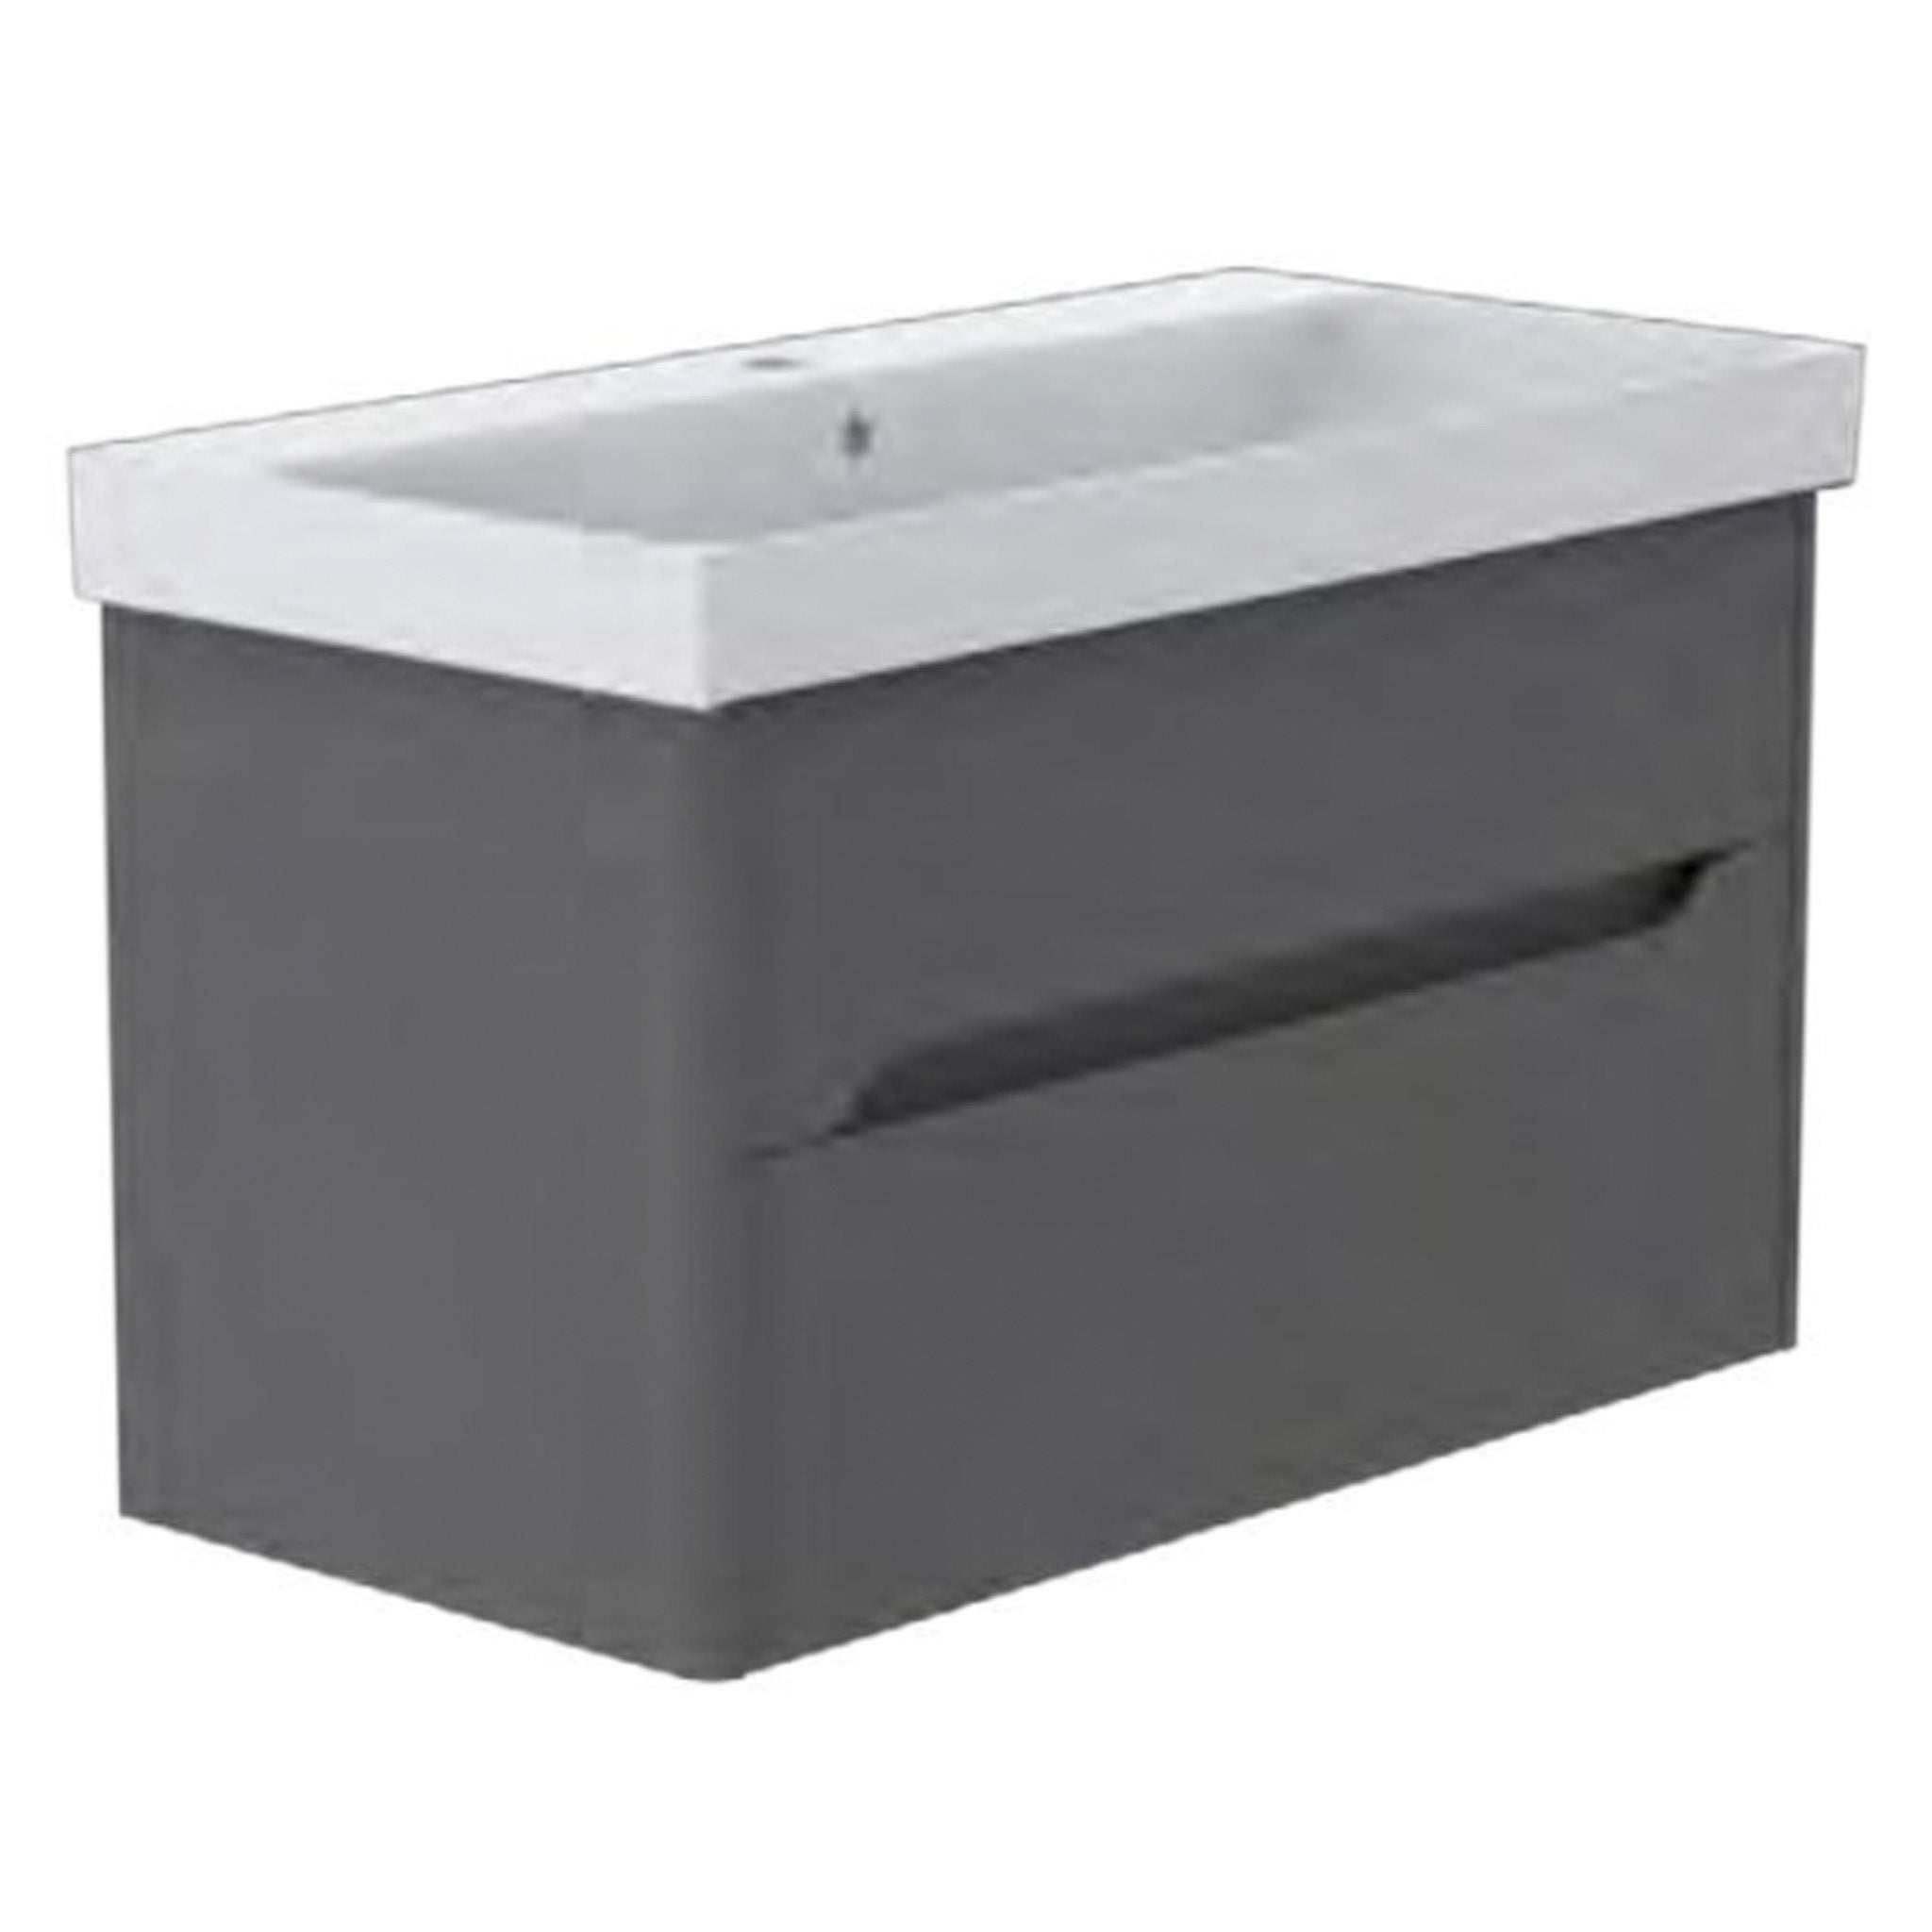 GSI Nubes Lacquer 100 x 50 2 Drawer Vanity Unit